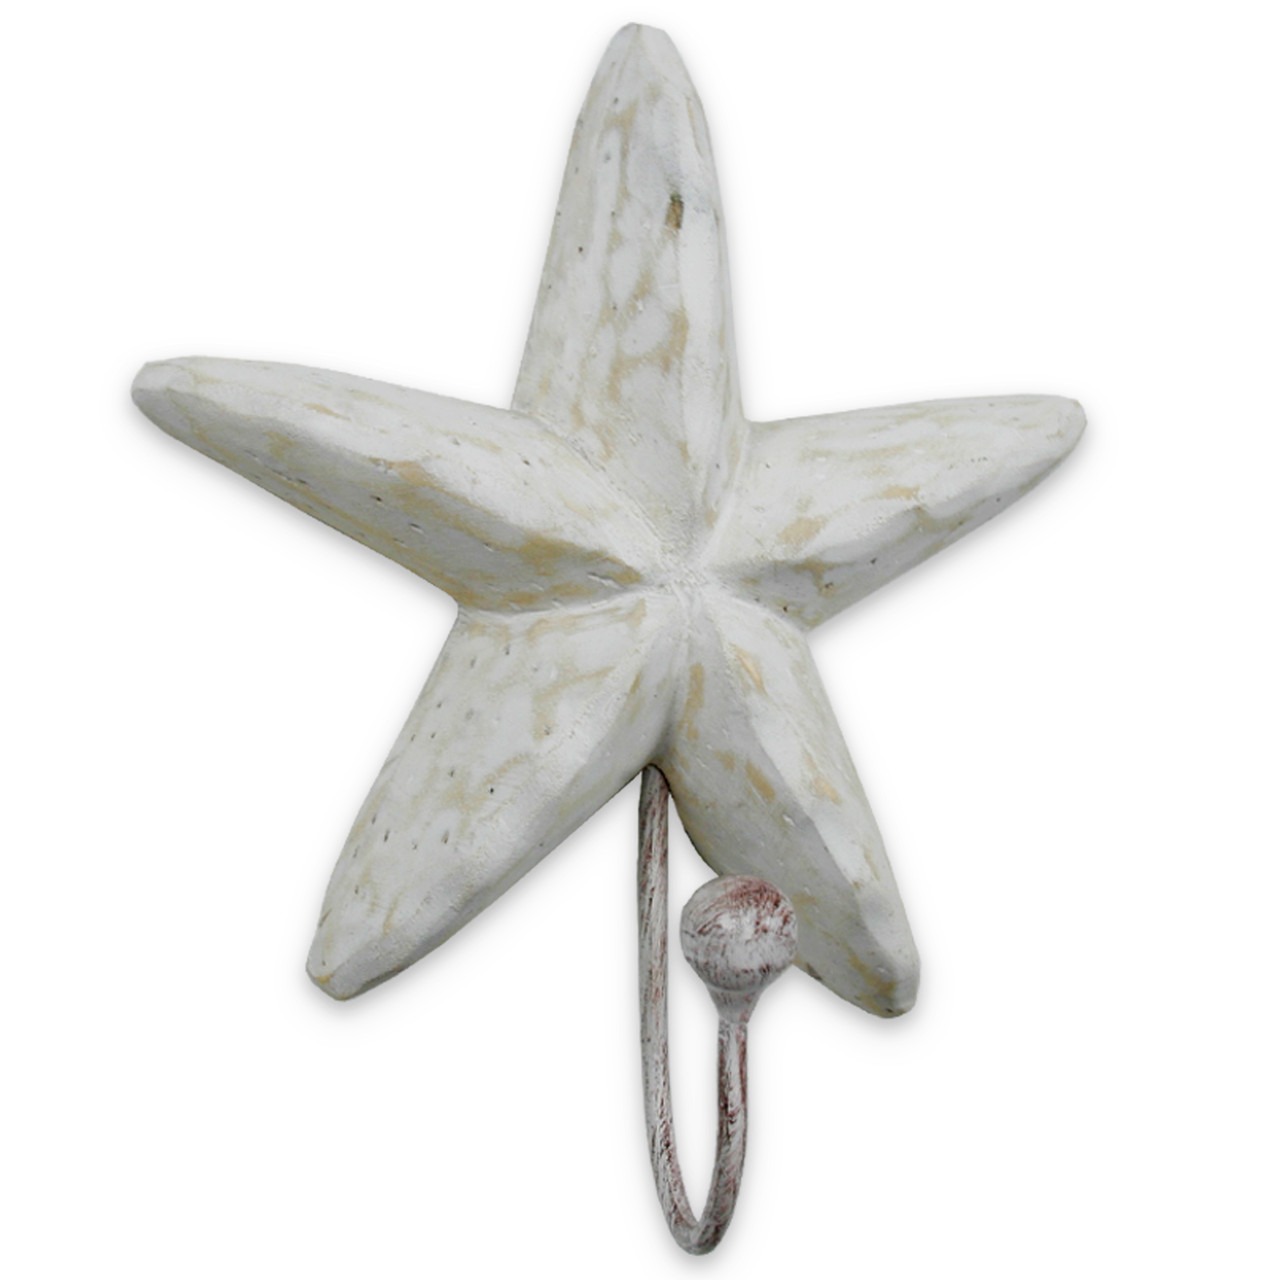 Little Starfish Metal Wall Hook Navy Blue or Pick Color